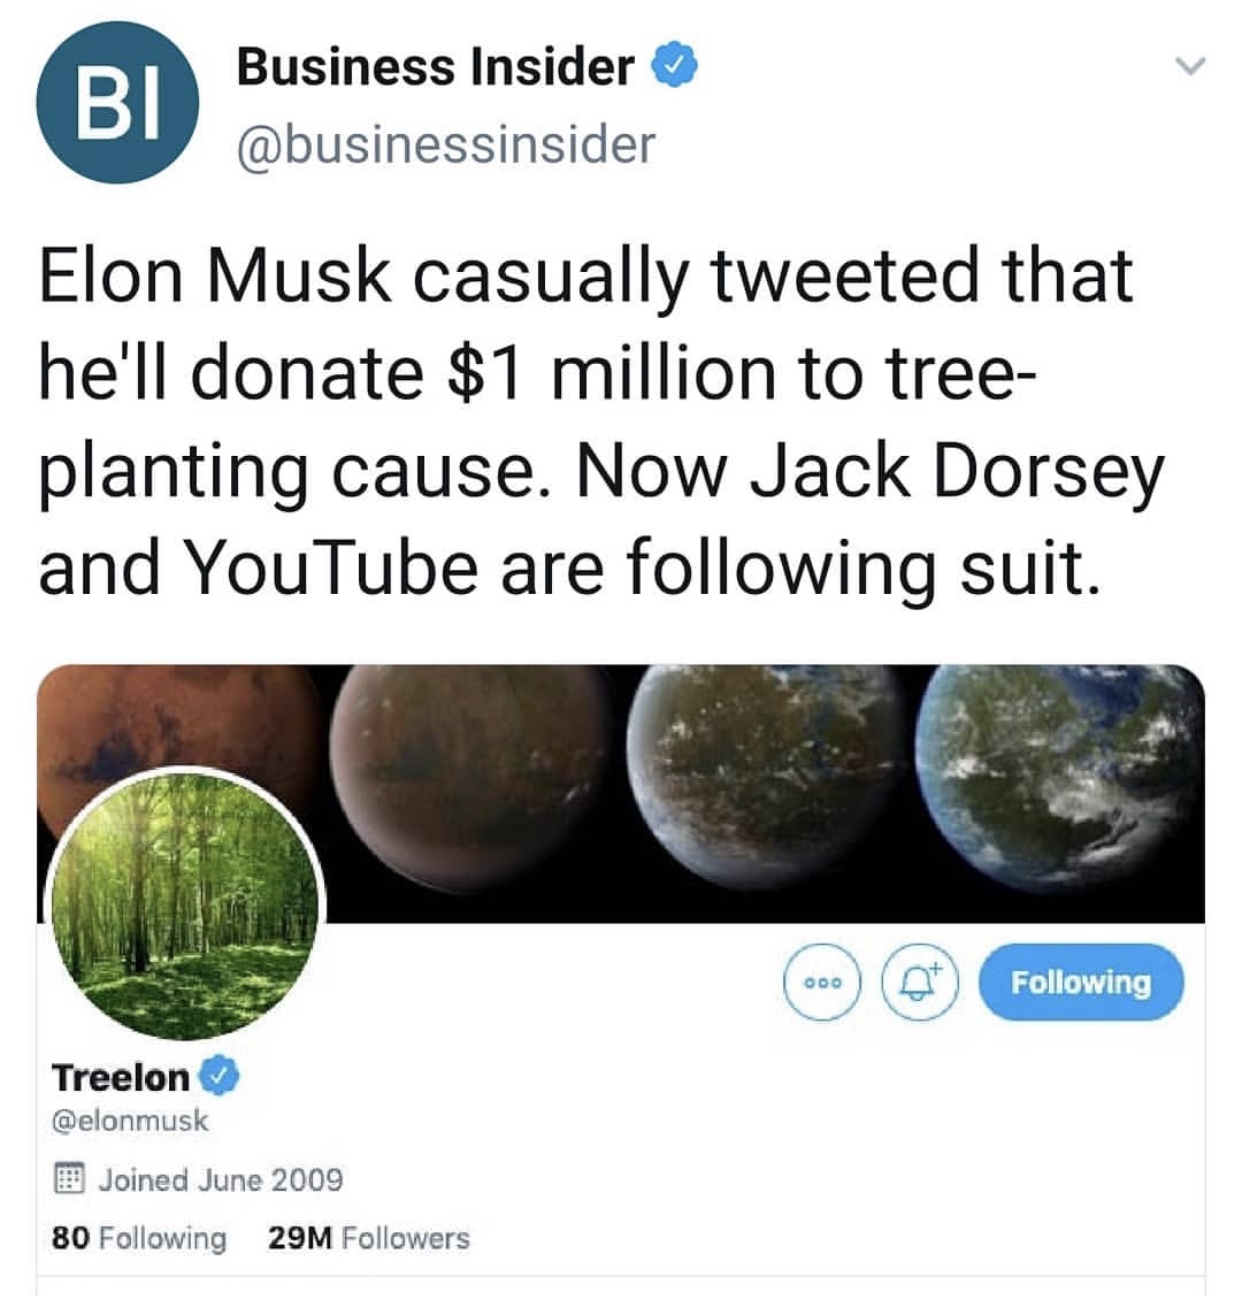 rimas de amor para enamorar - Business Insider Bi Elon Musk casually tweeted that he'll donate $1 million to tree planting cause. Now Jack Dorsey and YouTube are ing suit. @ ing ing Treelon B Joined 80 ing 29M ers